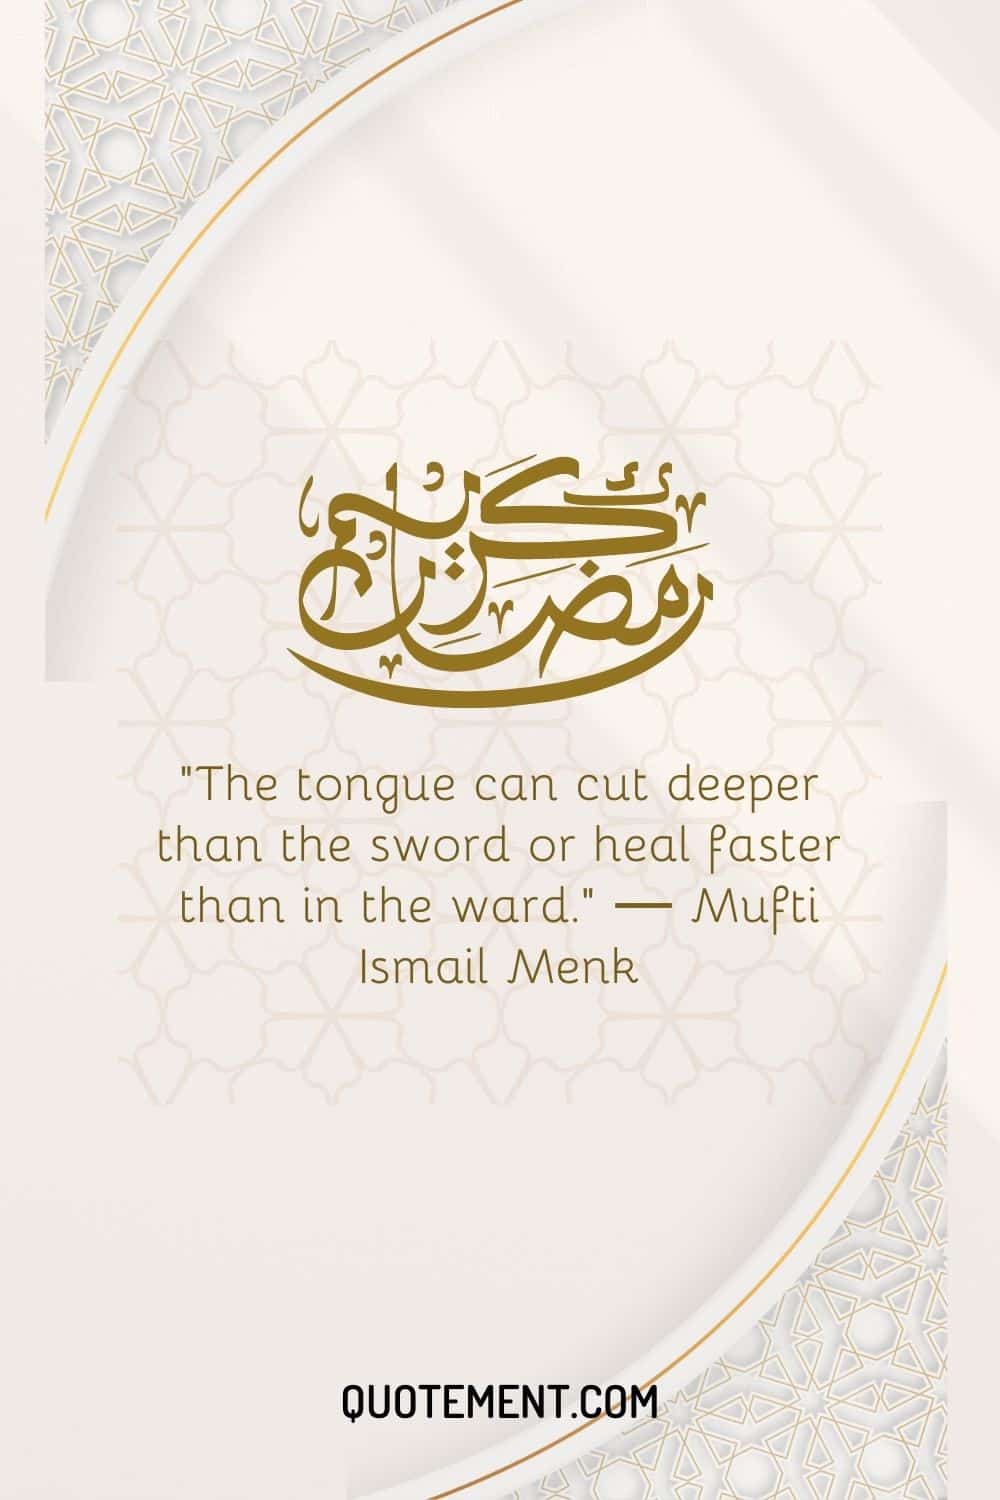 The tongue can cut deeper than the sword or heal faster than in the ward.